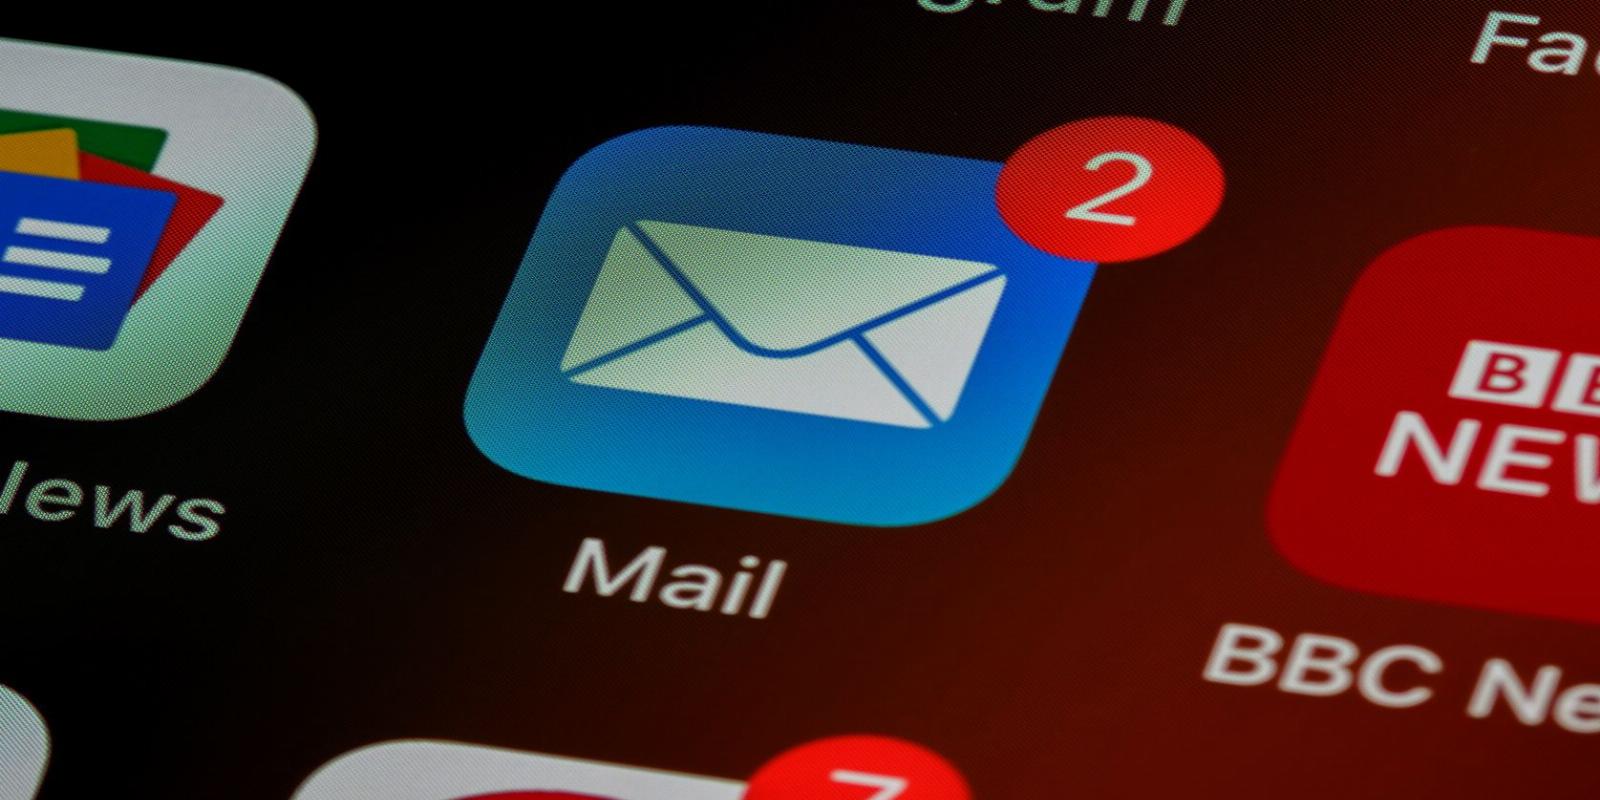 Is Your Business Email Secure, and Who Is Able to Read Your Messages?